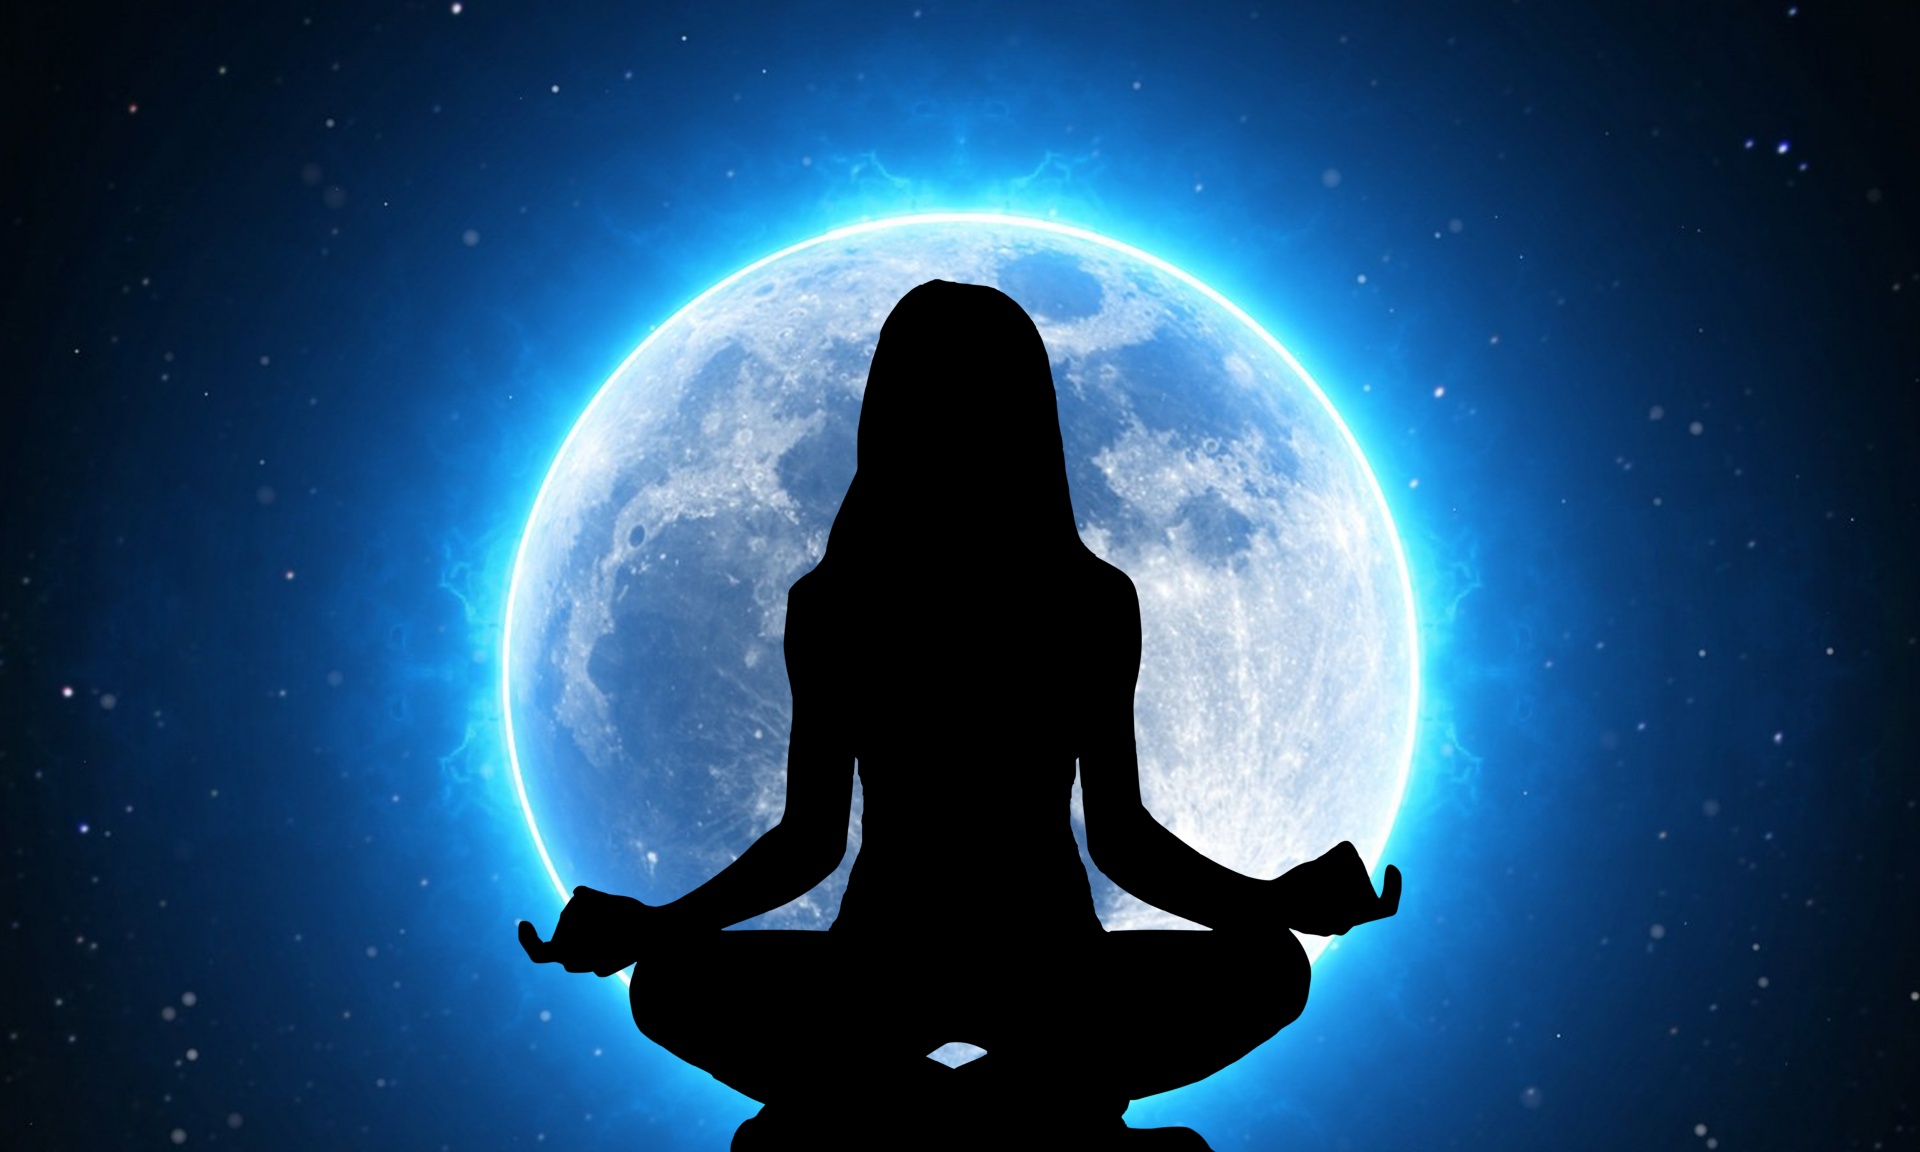 Yoga and the moon